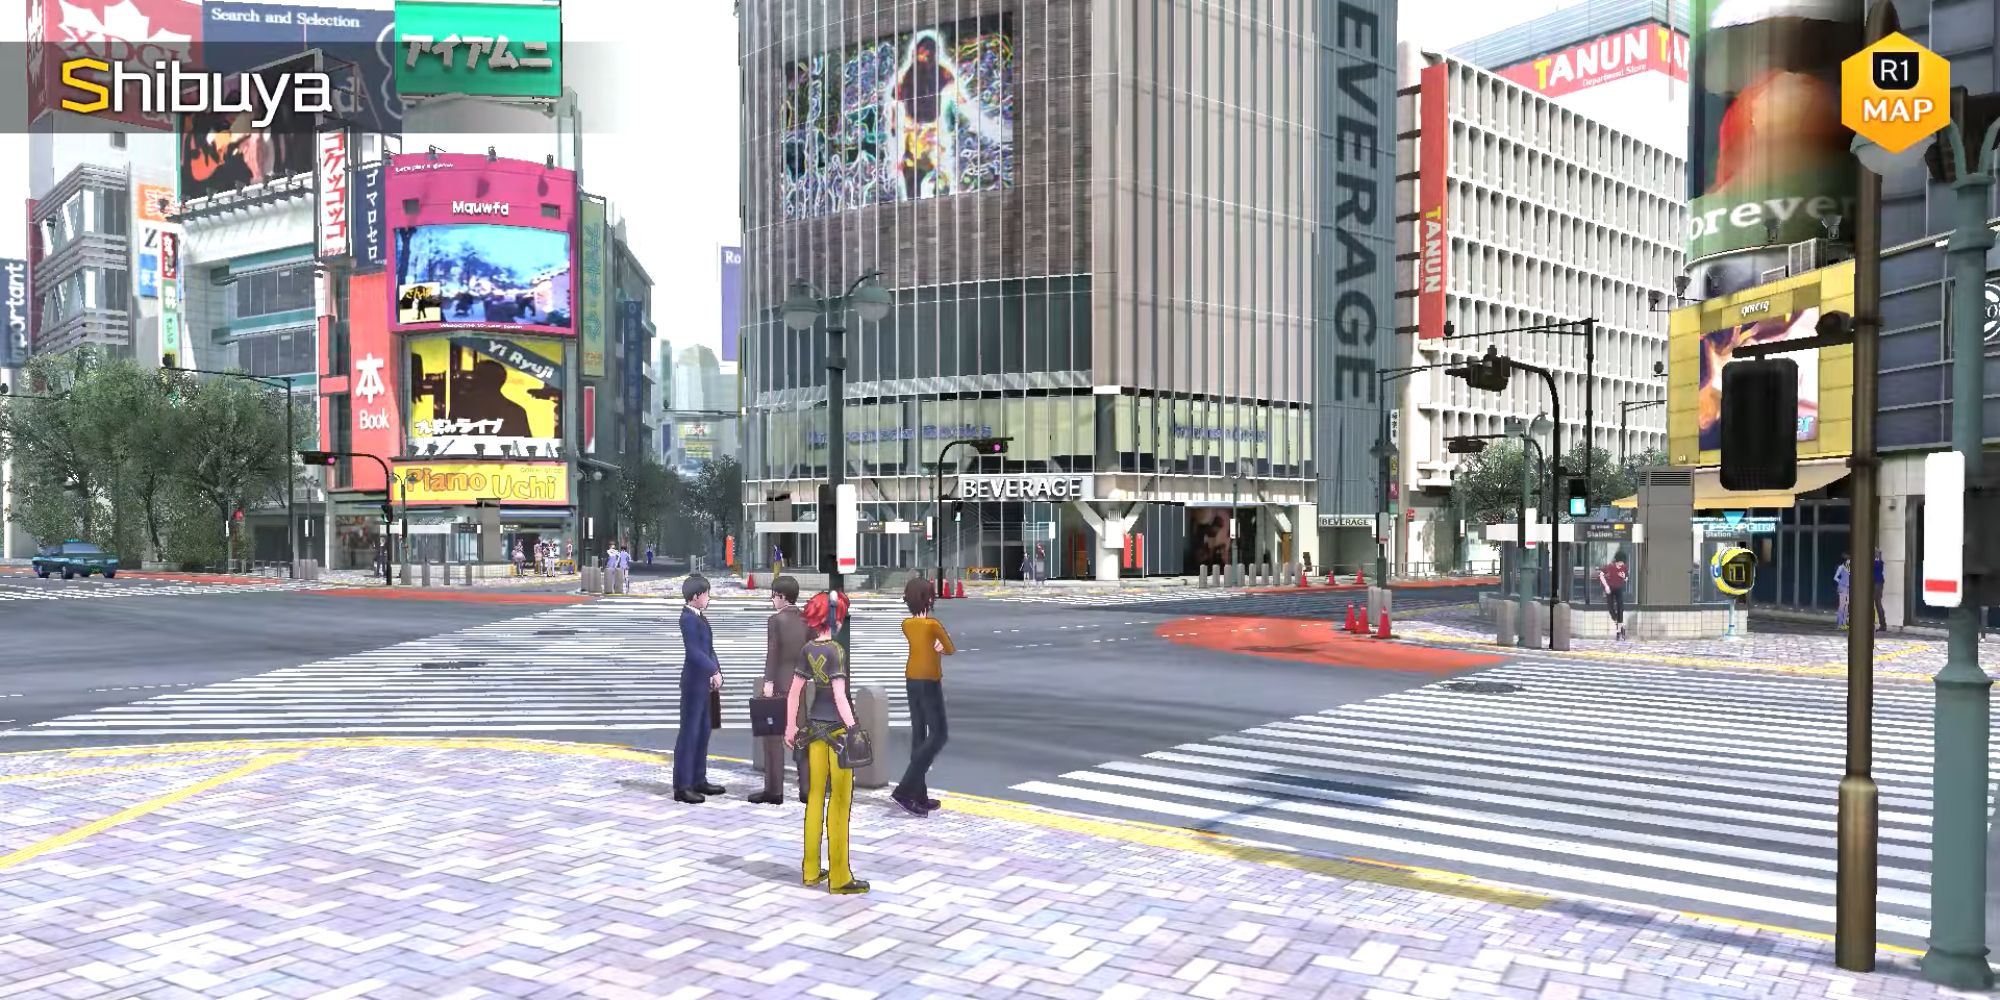 Digimon Story: Cyber Sleuth Takumi Aiba going over the Shibuya Crossing with people nearby